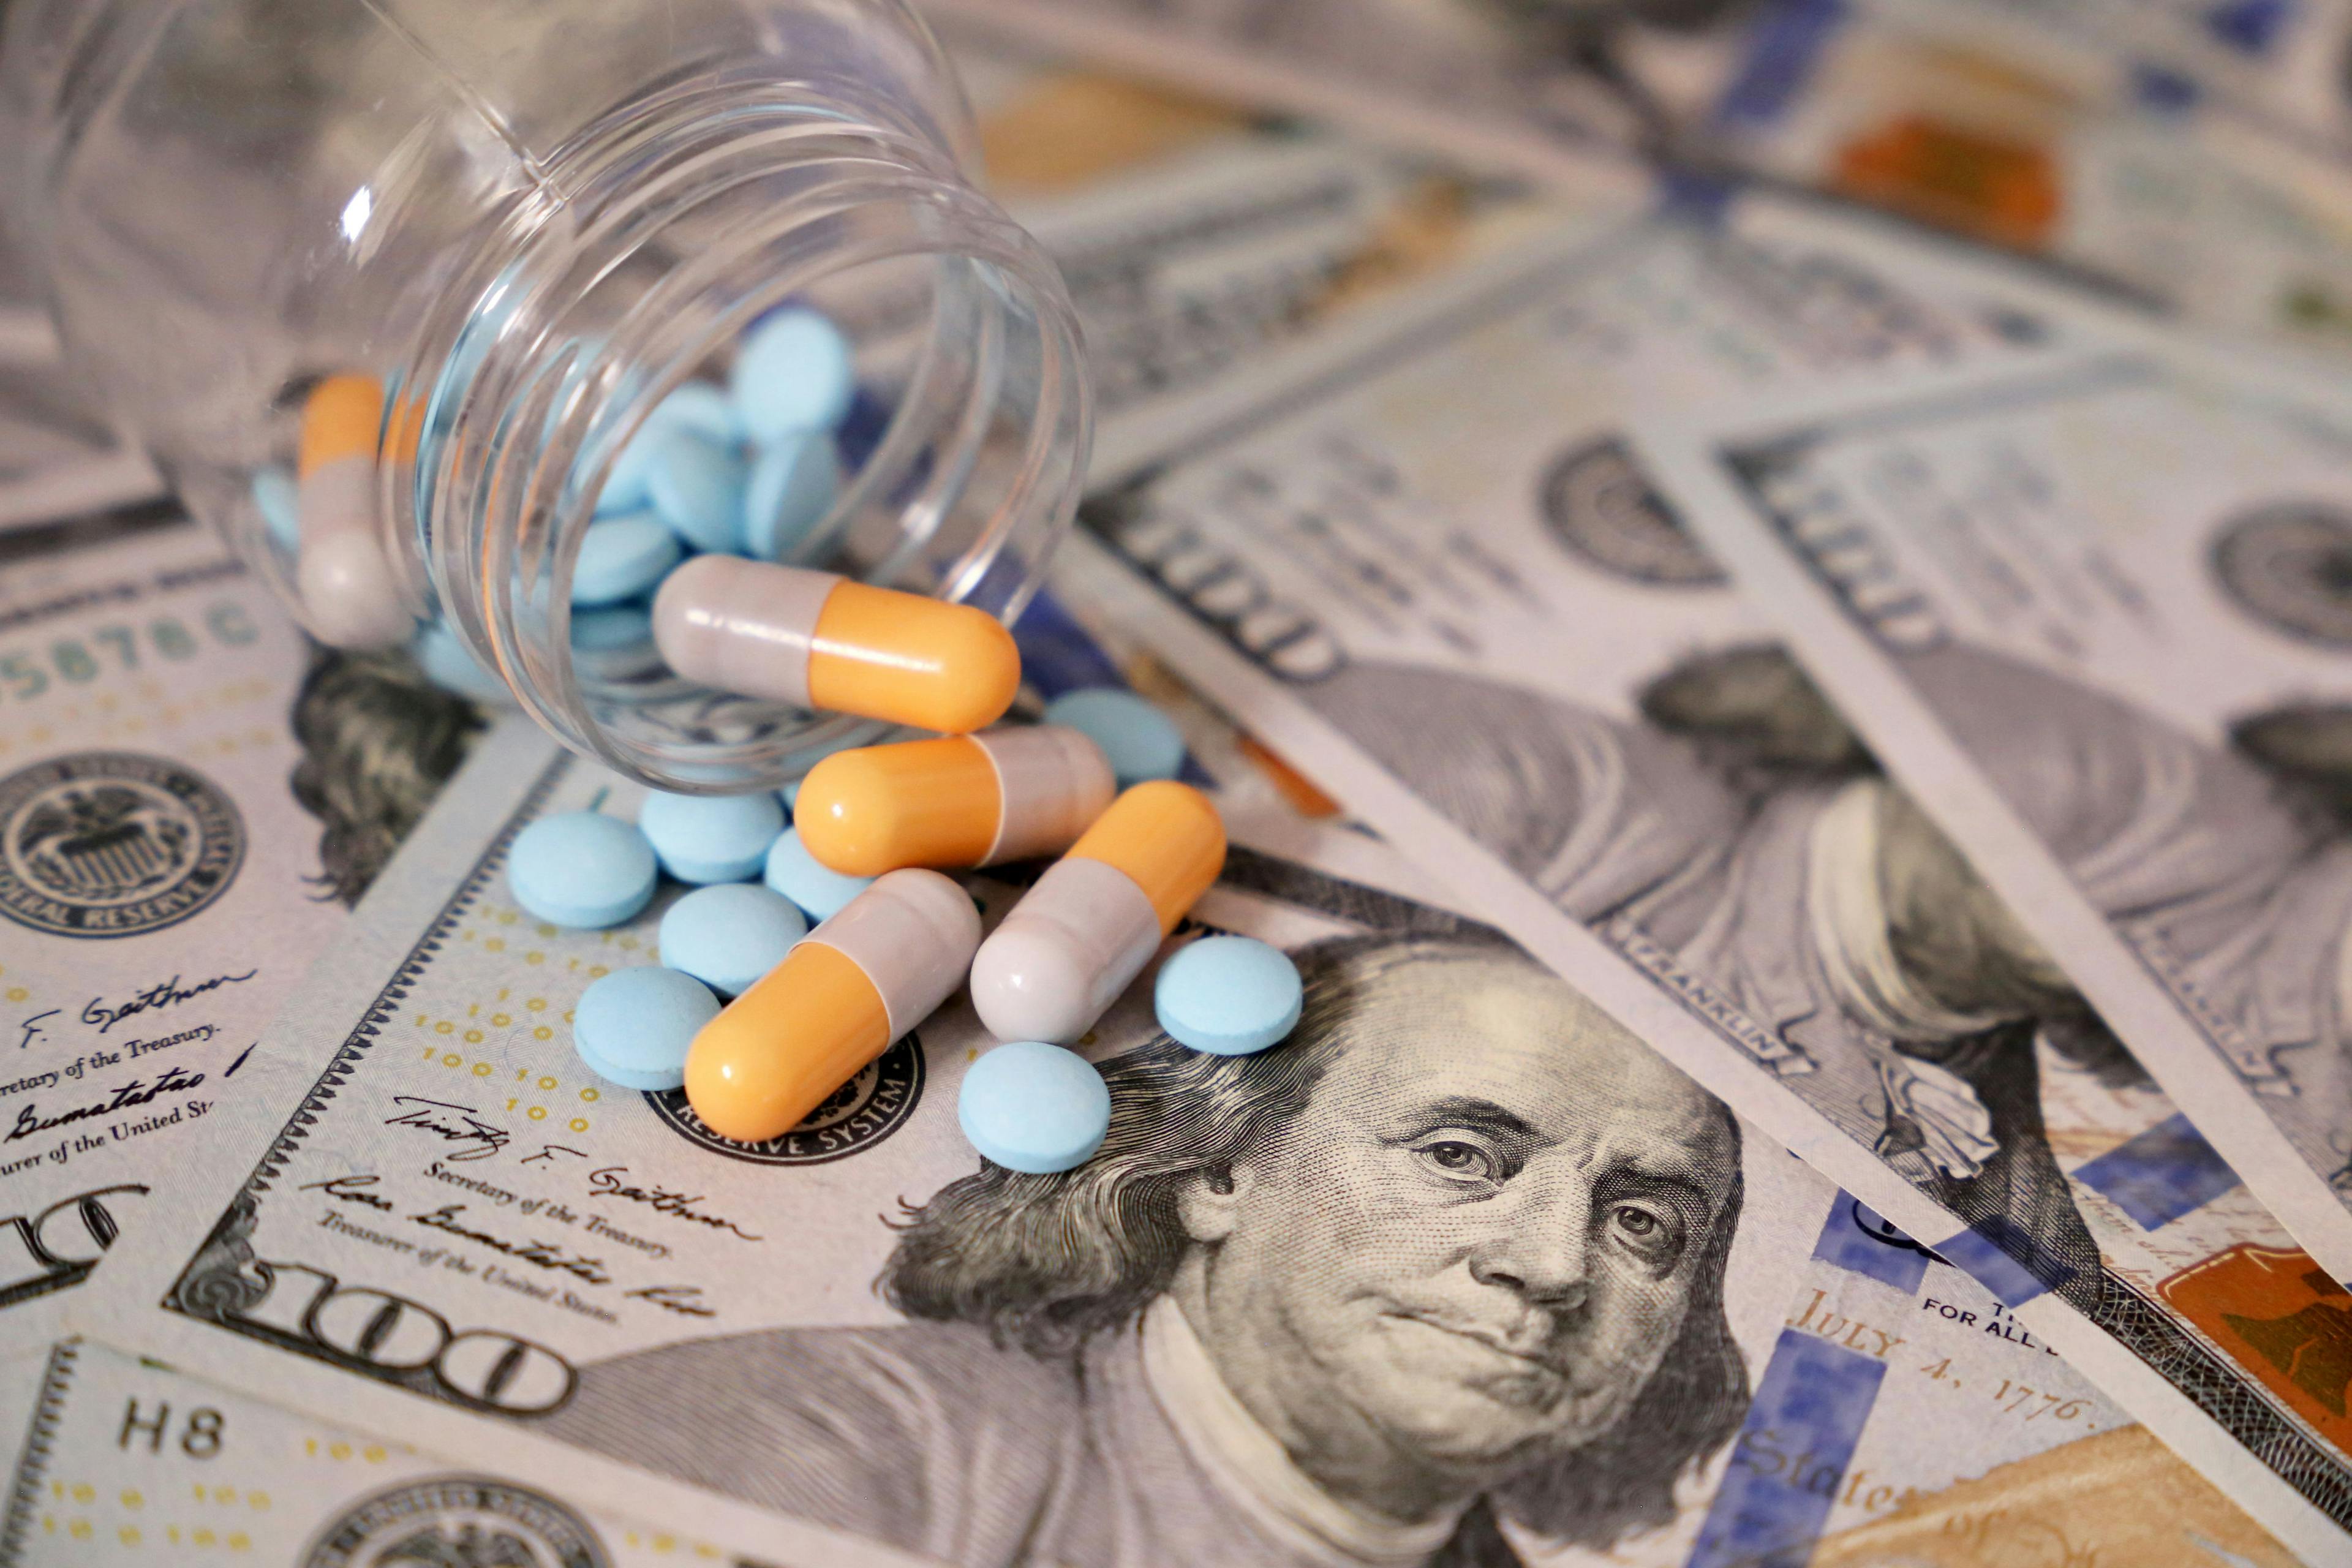 Expert Breaks Down Impact of IRA on Drug Prices and Patient Access